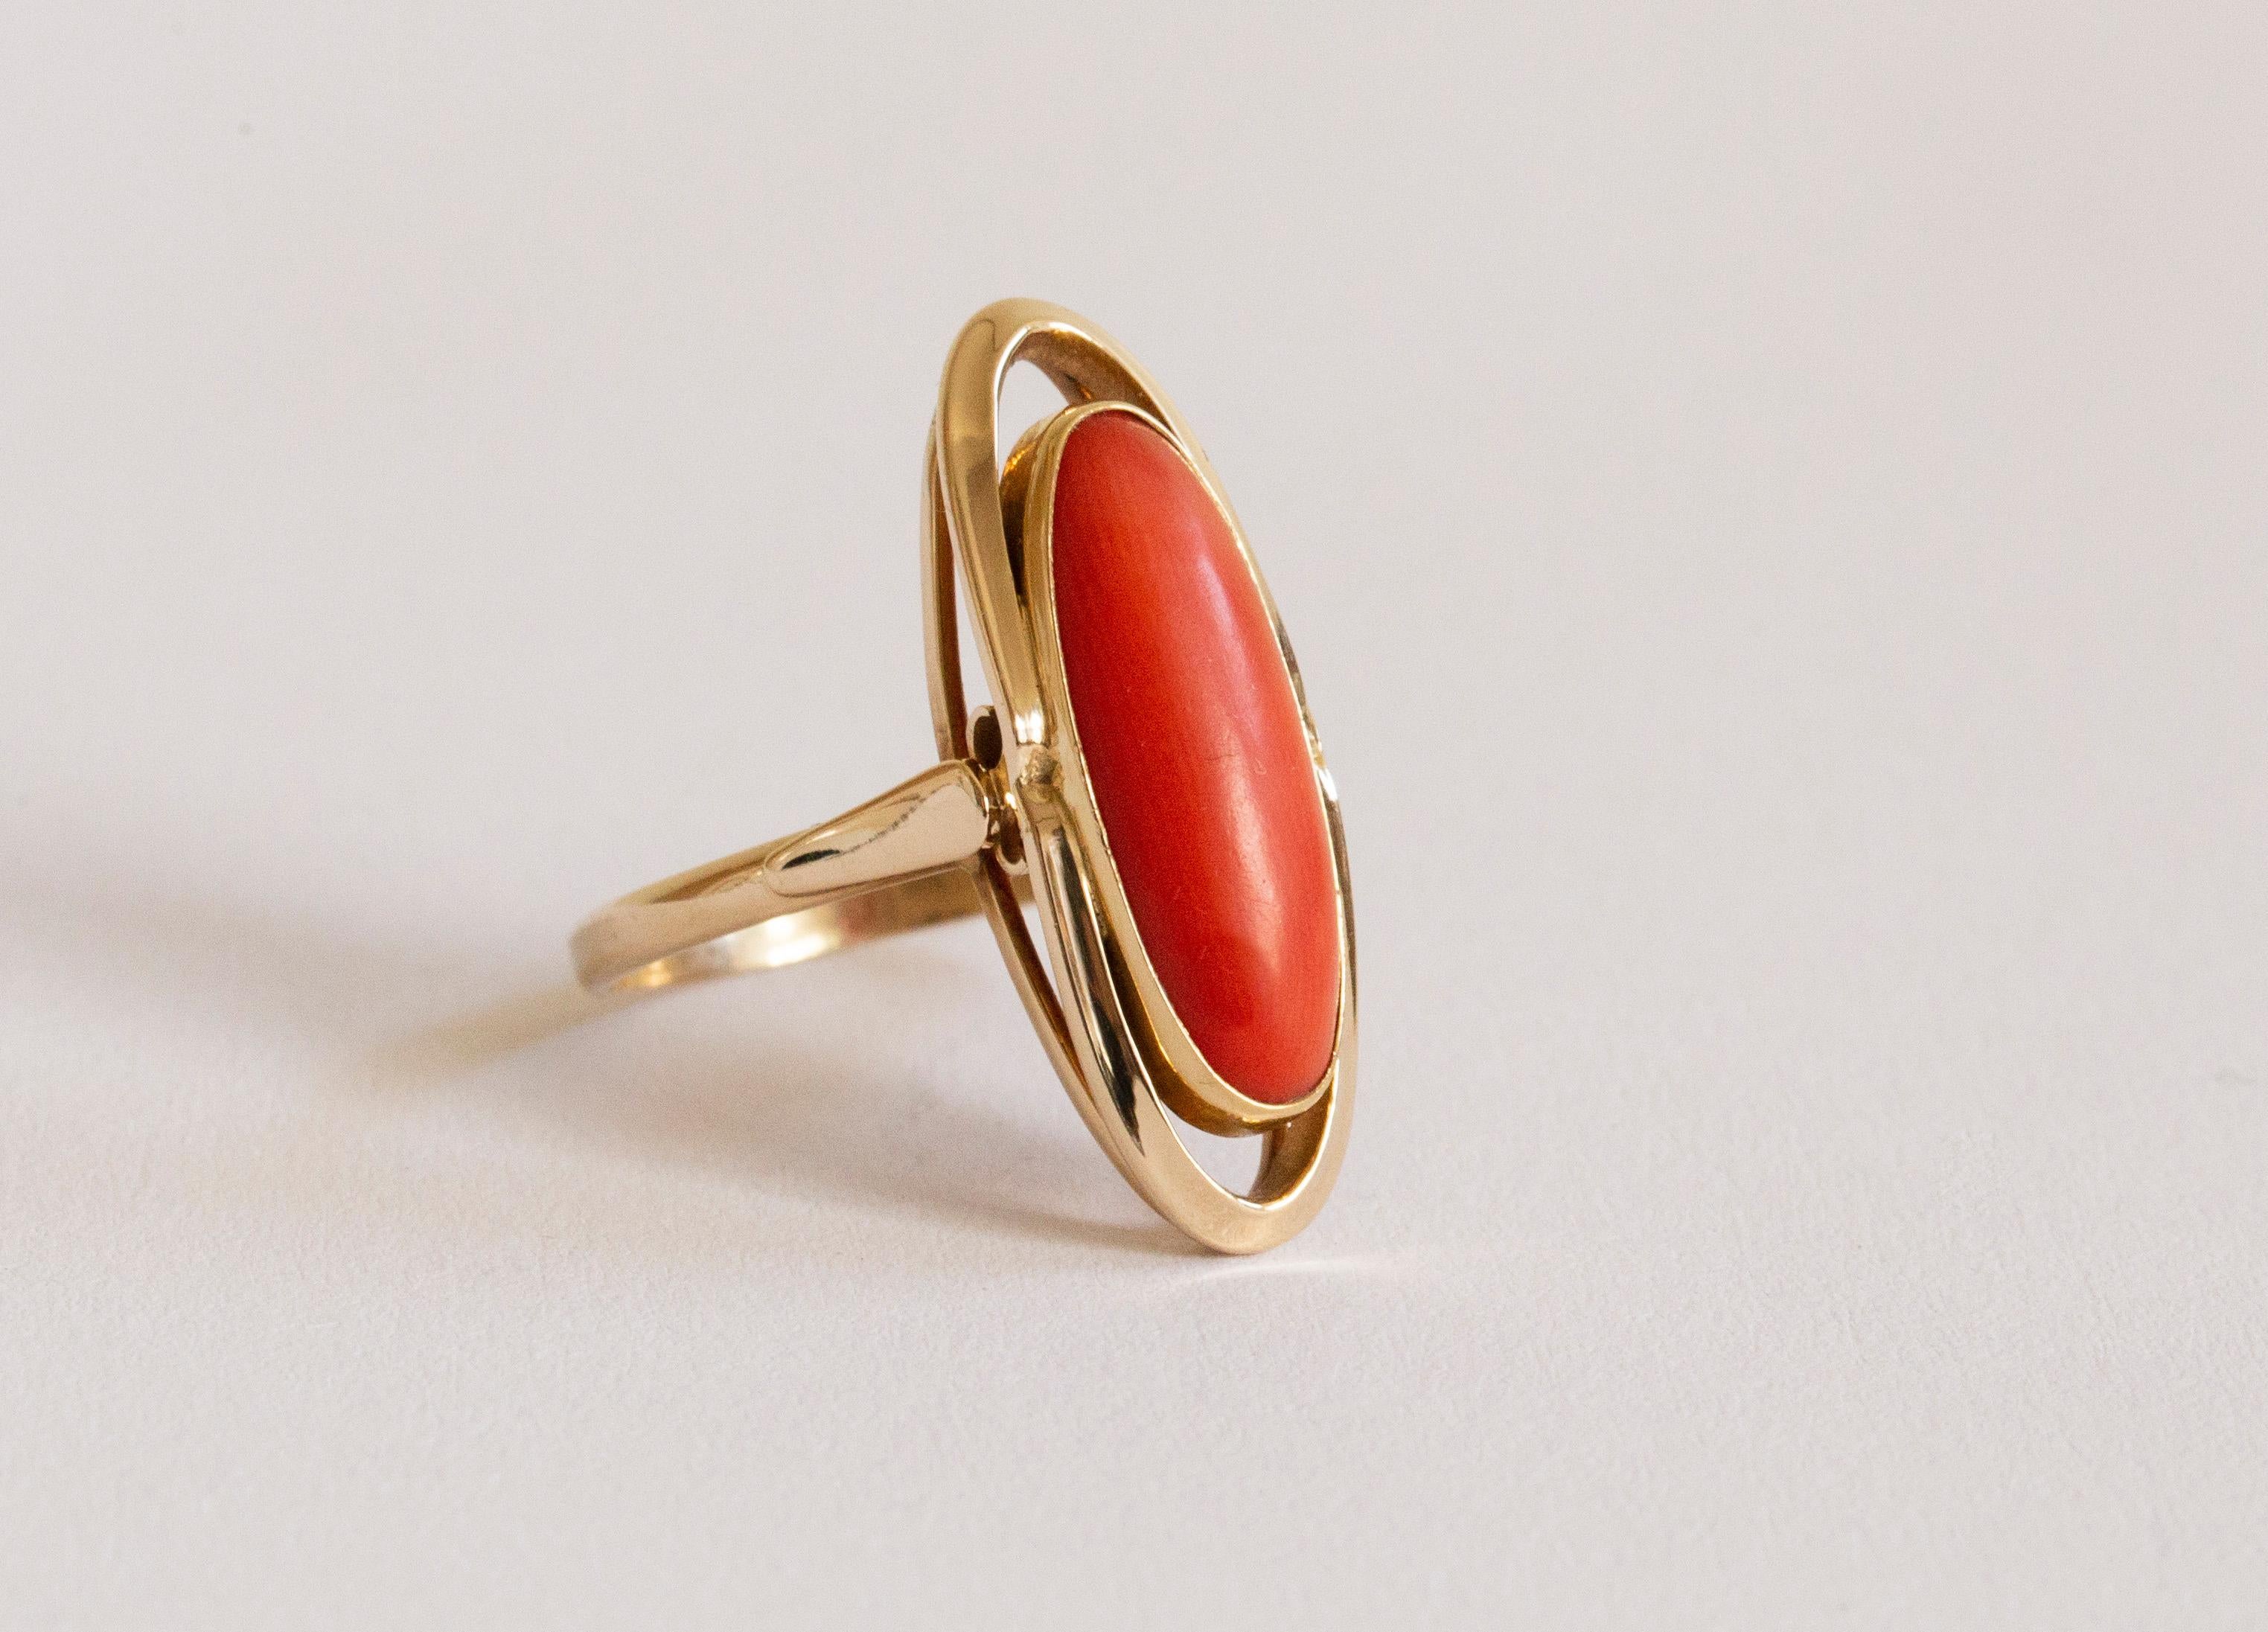 A vintage (ca. 1980s) 14 karat yellow gold with natural red coral cabochon. The ring features an elongated shape and the red coral is set in a smooth frame with a halo. The ring is marked 585 that stands for the 14 karat gold content.